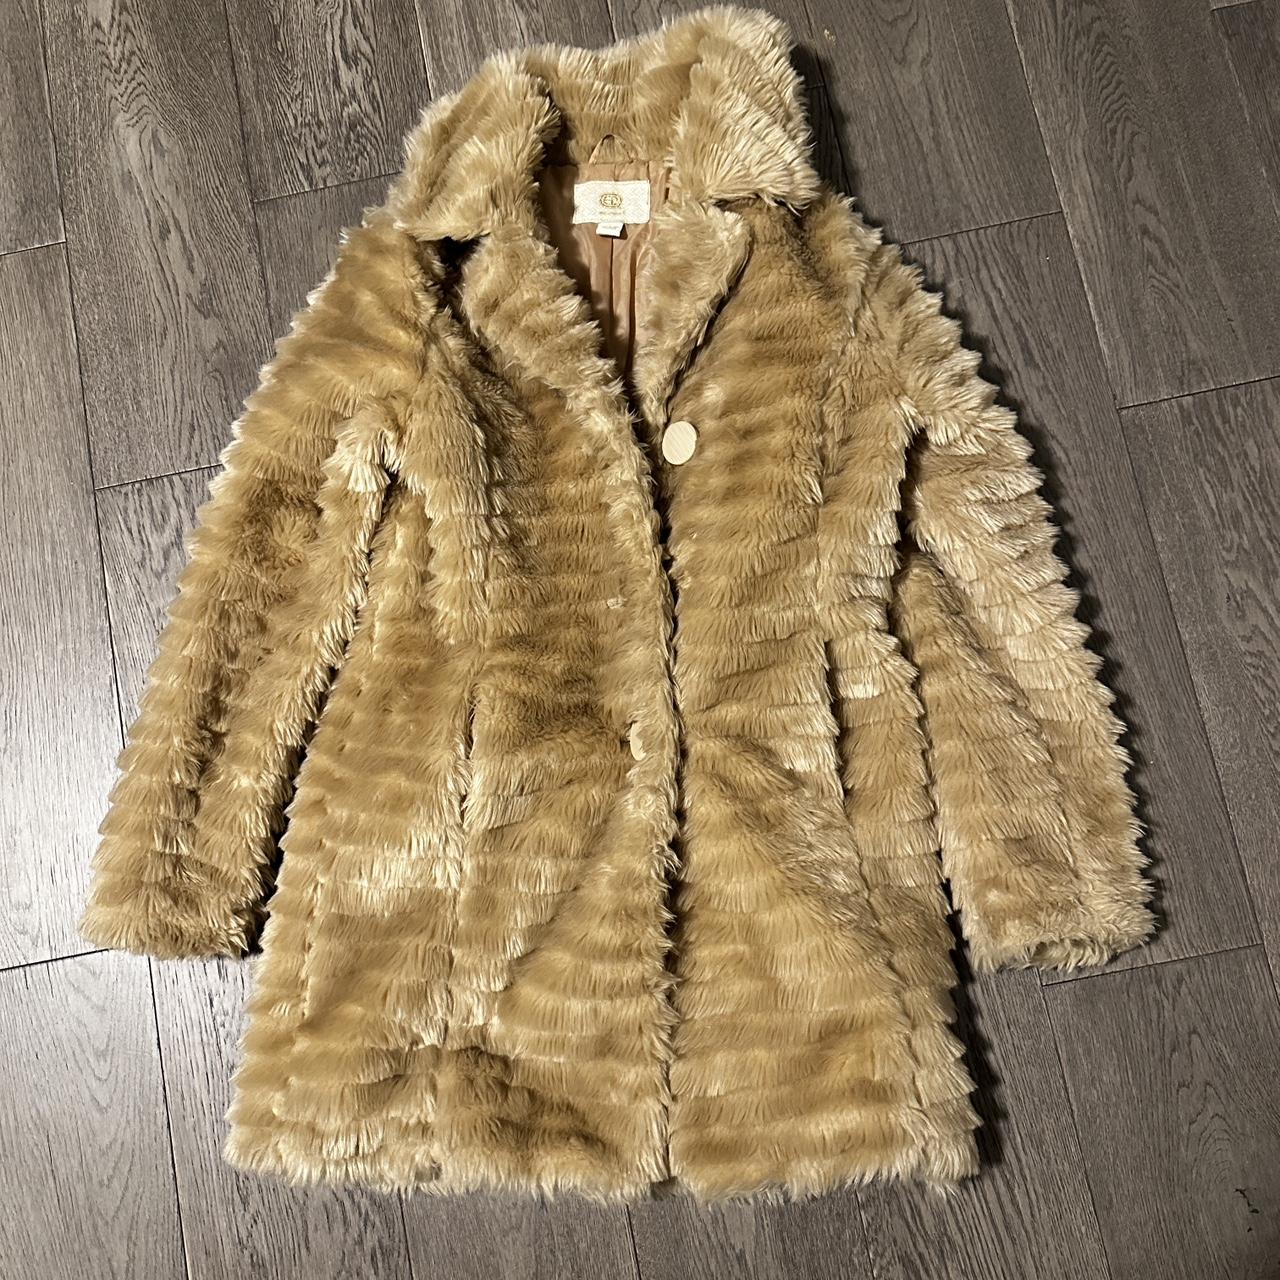 QED London Fur Coat - Size S to live out your mob... - Depop